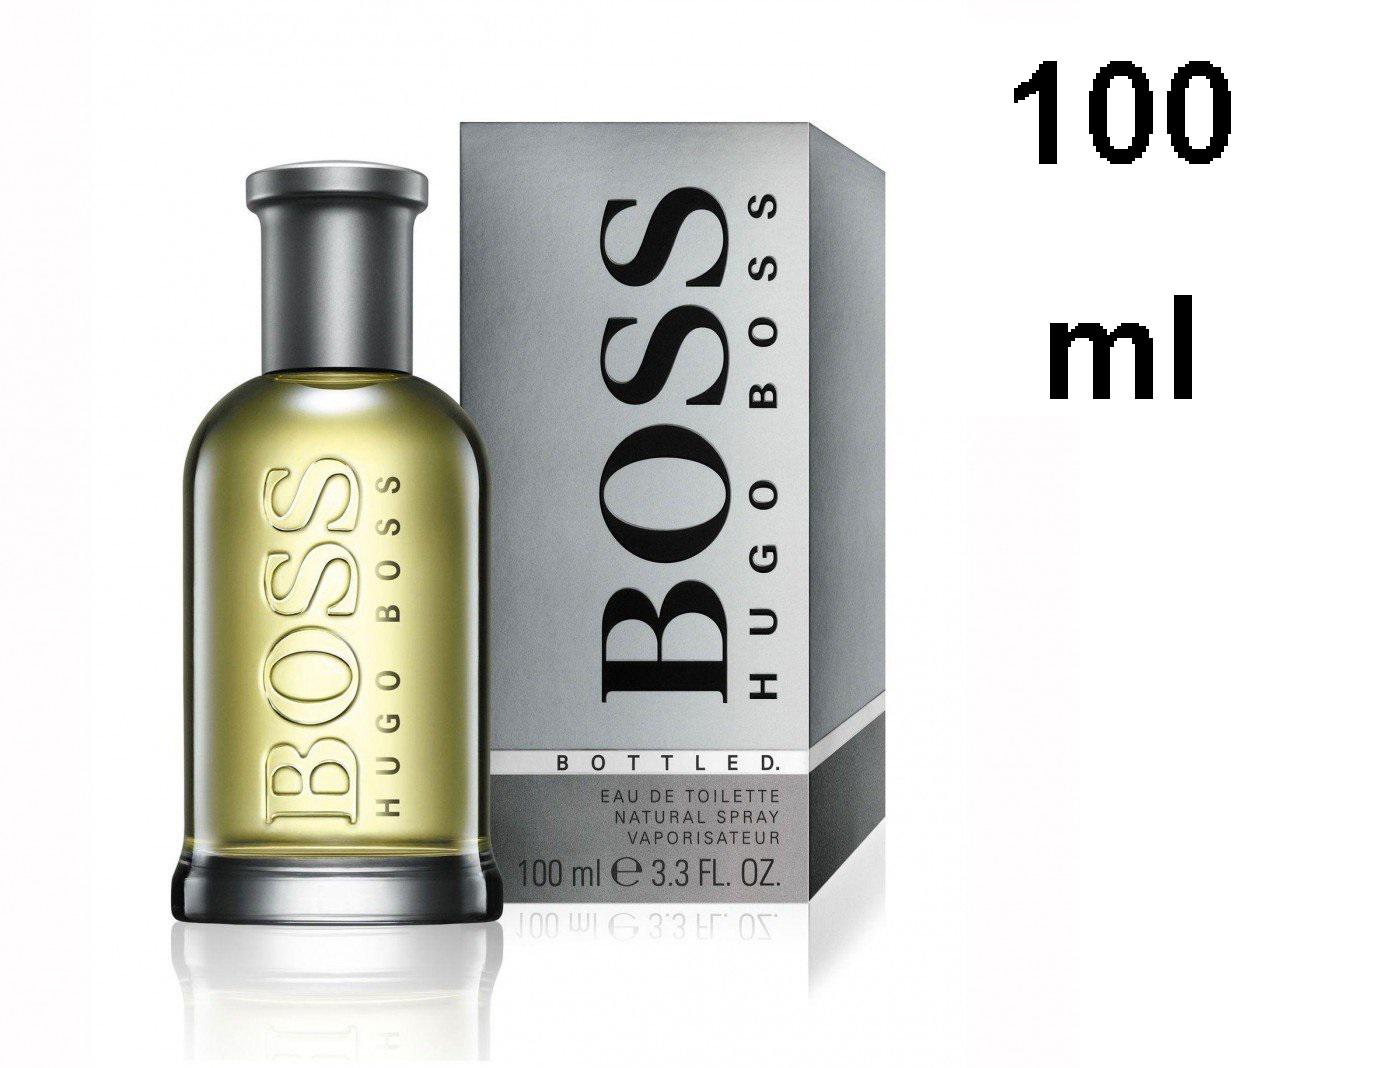 hugo boss bottled 100 ml Cheaper Than Retail Price\u003e Buy Clothing,  Accessories and lifestyle products for women \u0026 men -